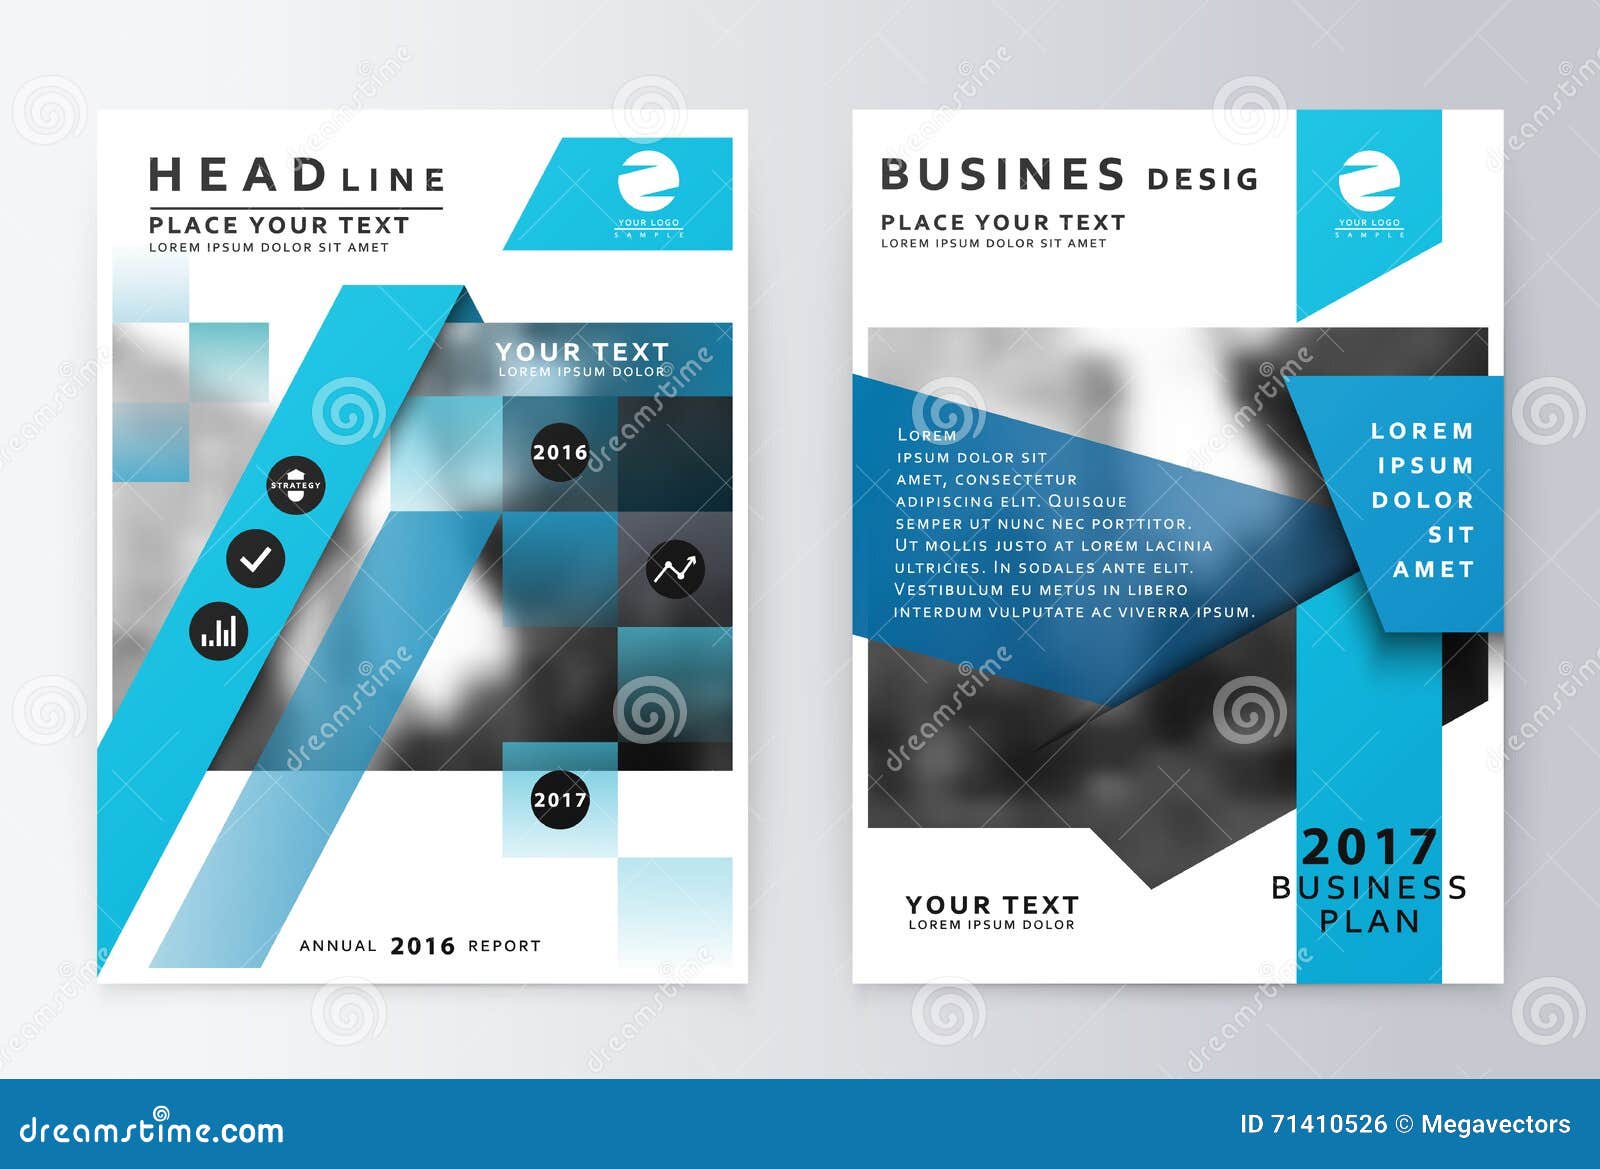 16+ Sample Business Reports Samples, Examples, Templates